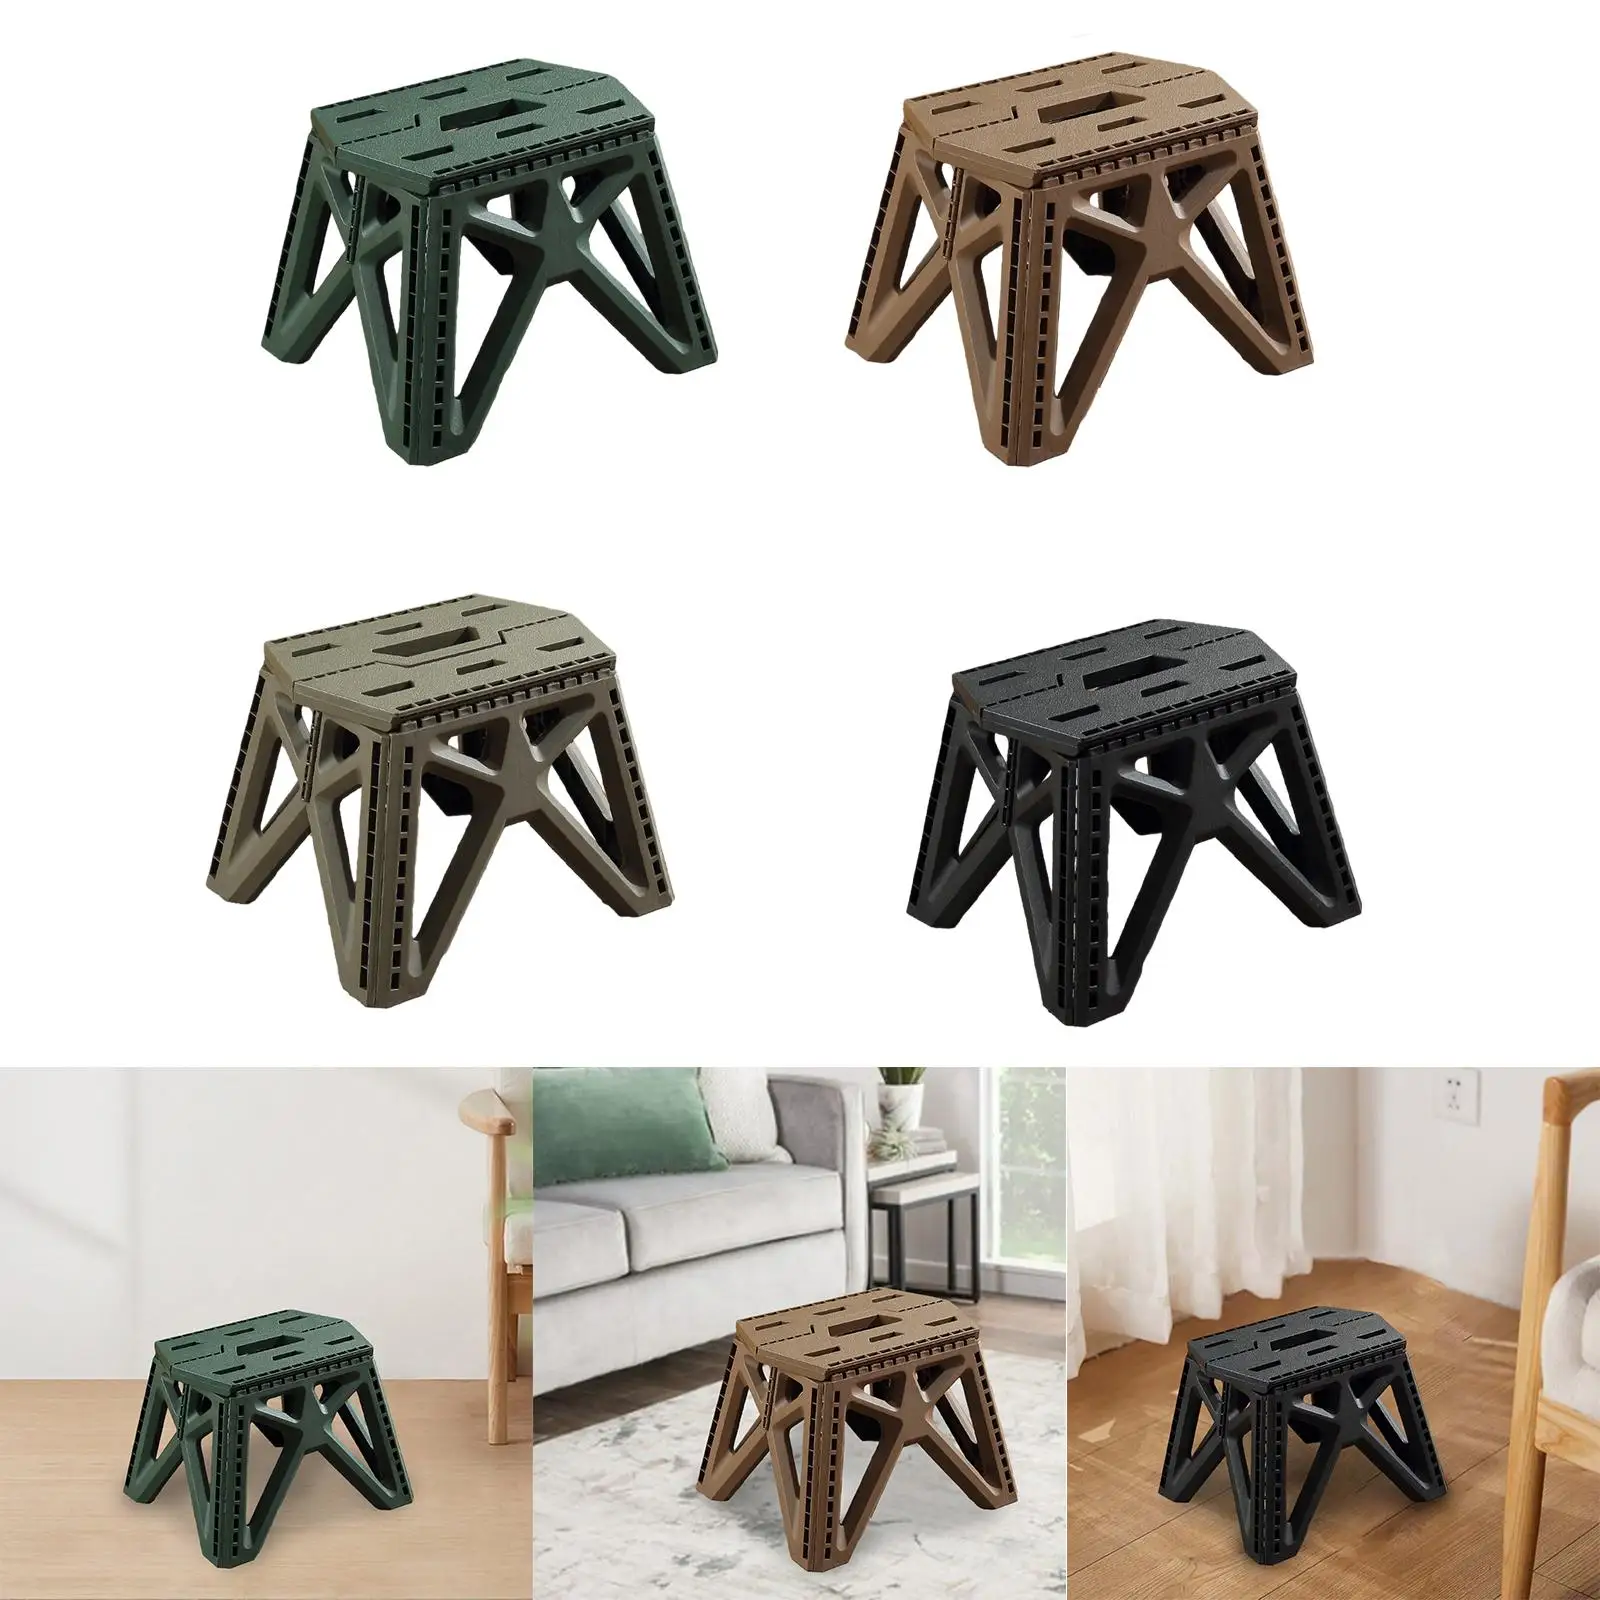 Foldable Camping Stool Portable Foldable Stool for Backpacking Picnic Hiking